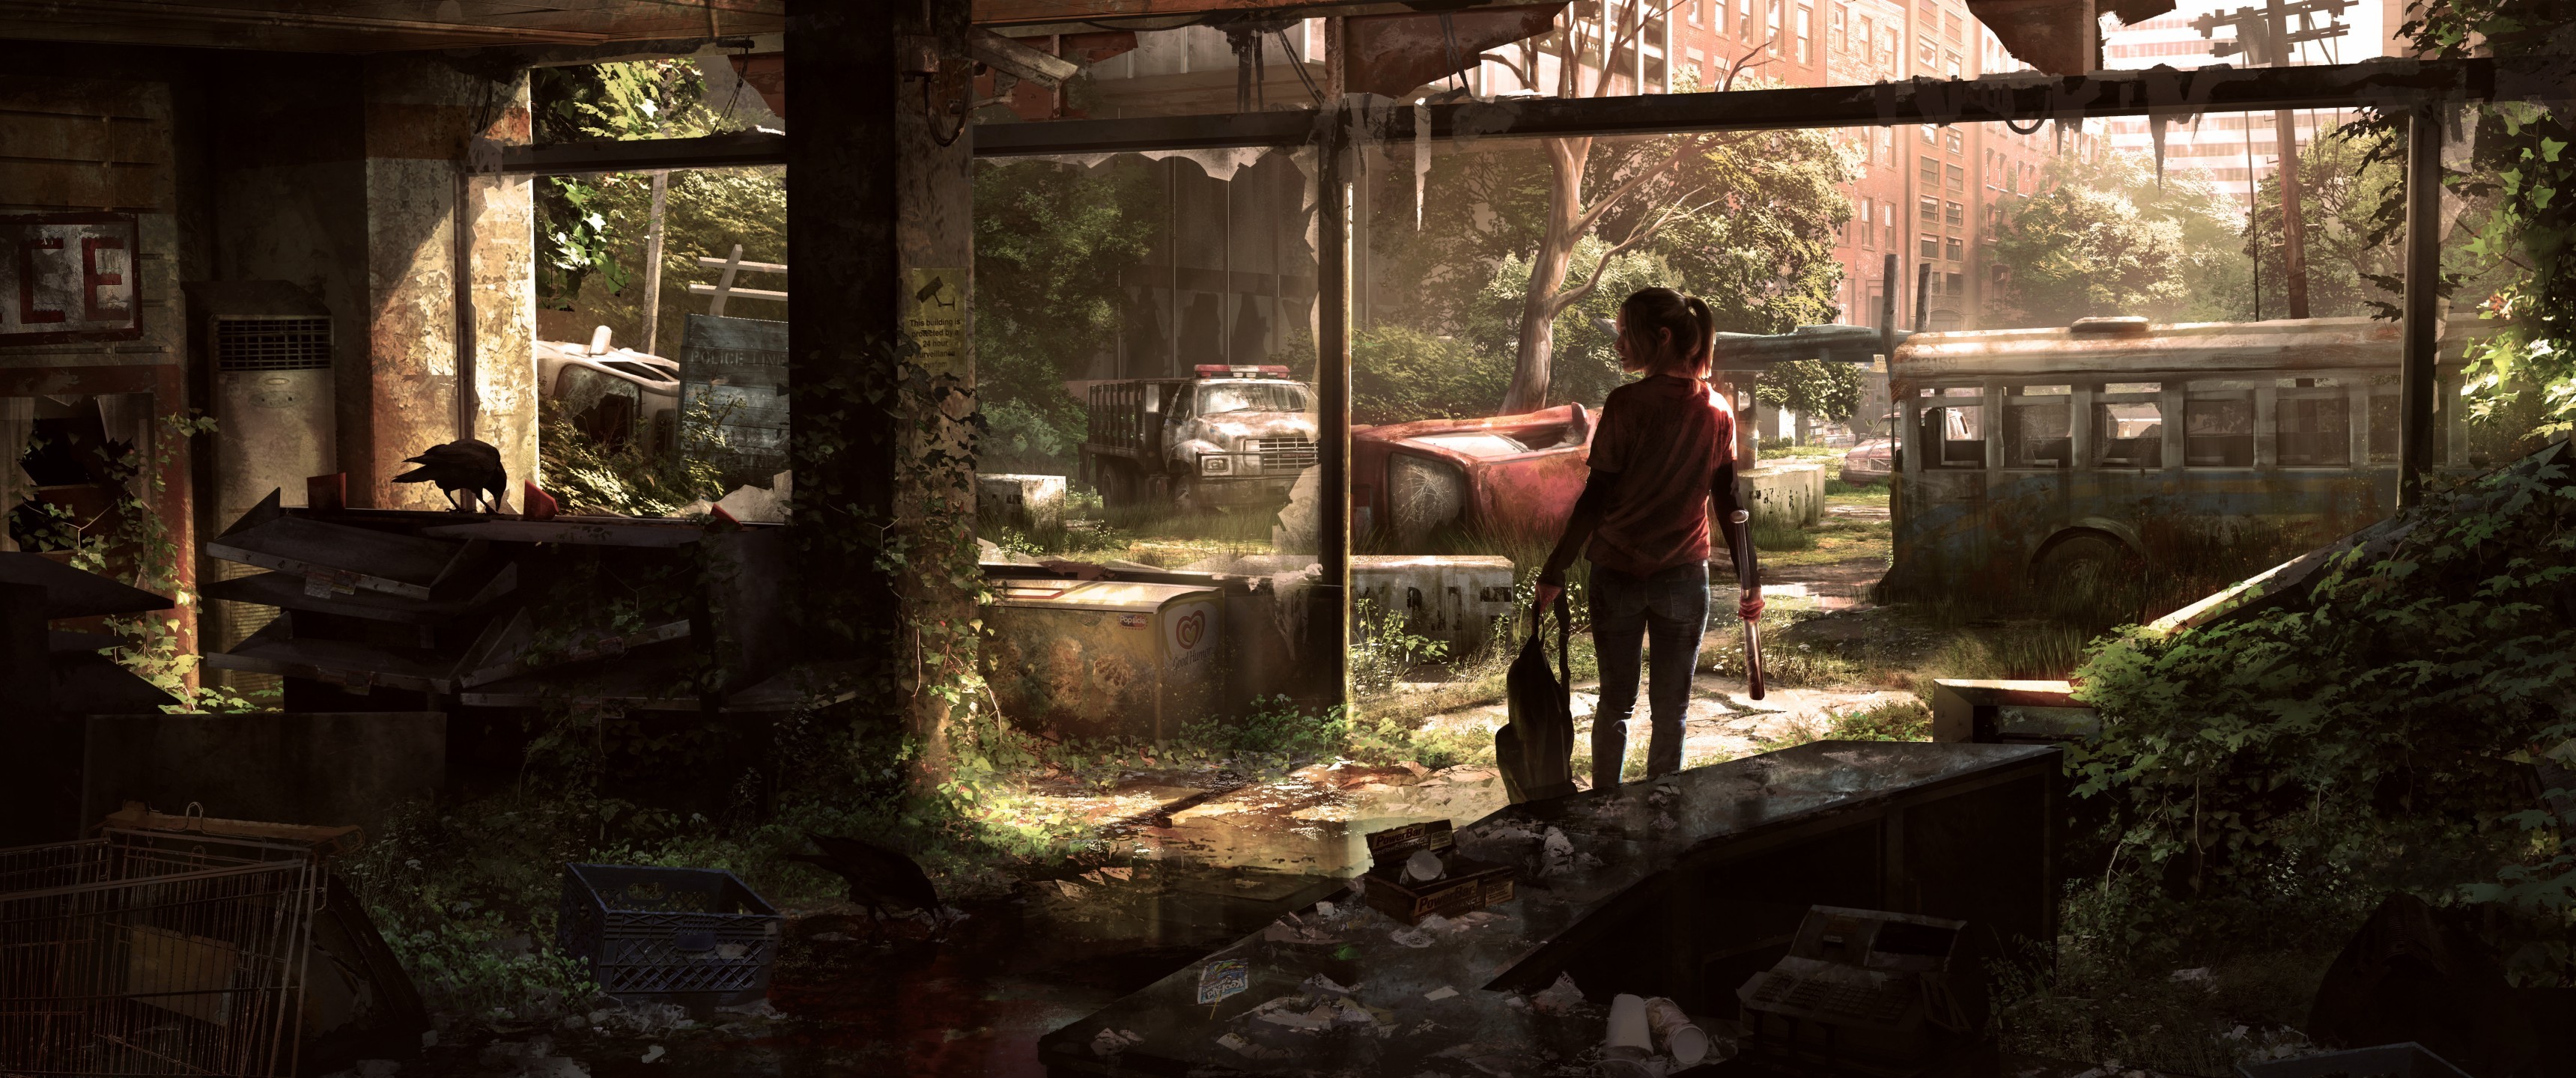 General 3440x1440 The Last of Us apocalyptic video game art video games video game girls wreck ruins abandoned